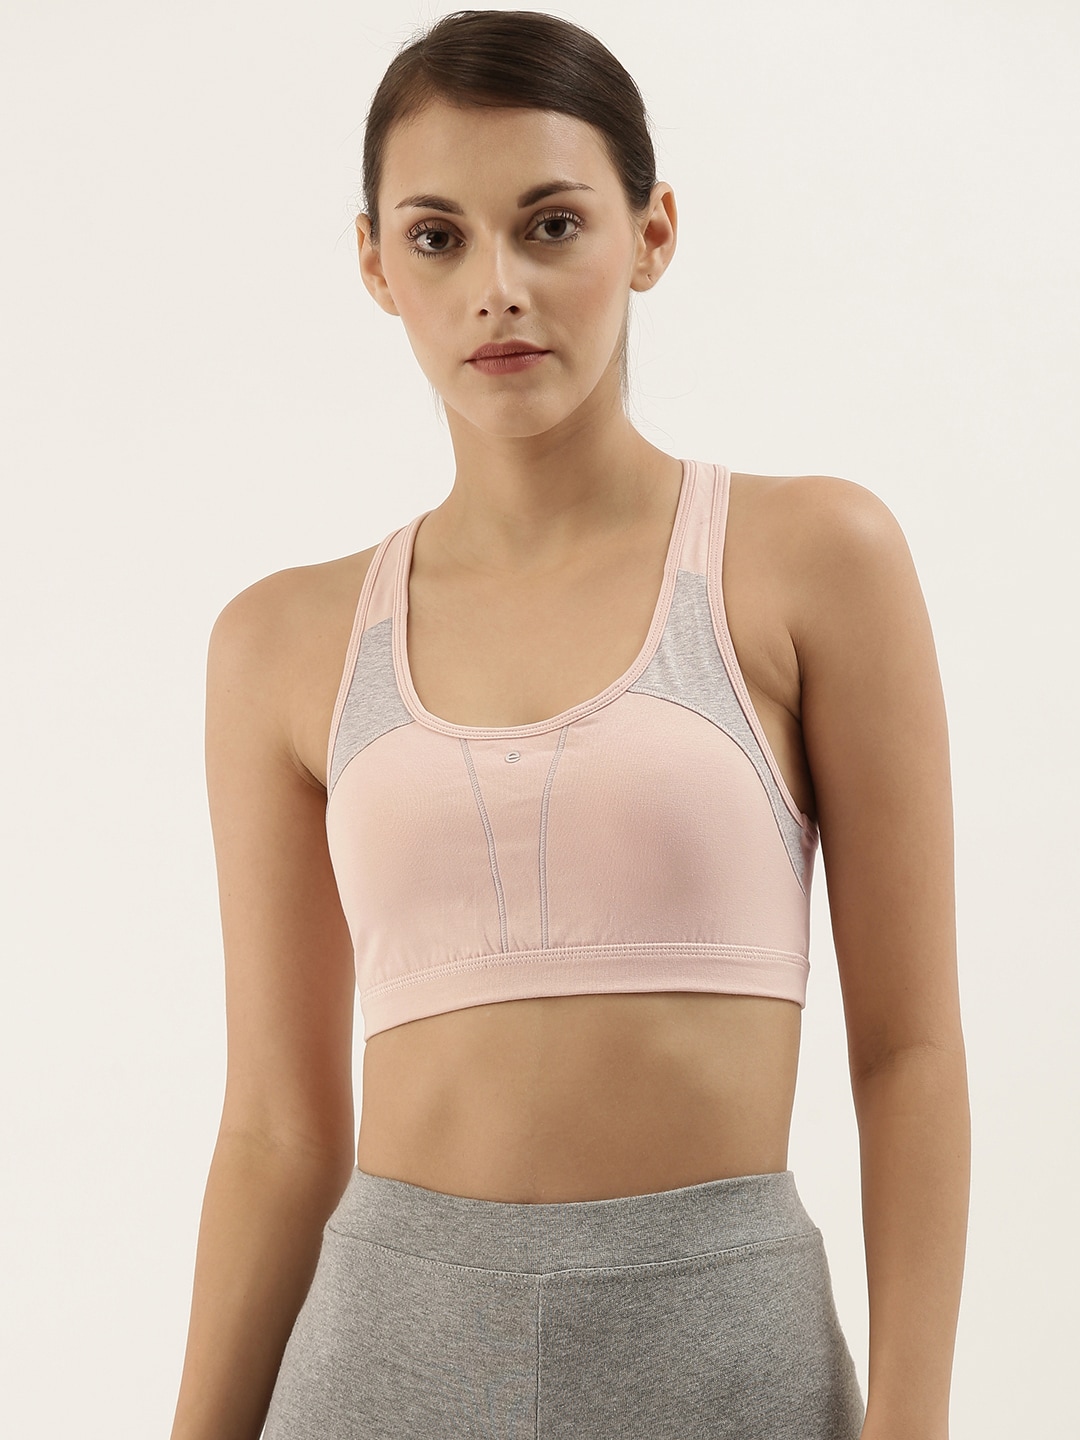 Enamor  Pink Solid Non-Wired Removable Pads High Coverage Medium Impact Sports Bra SB08 Price in India